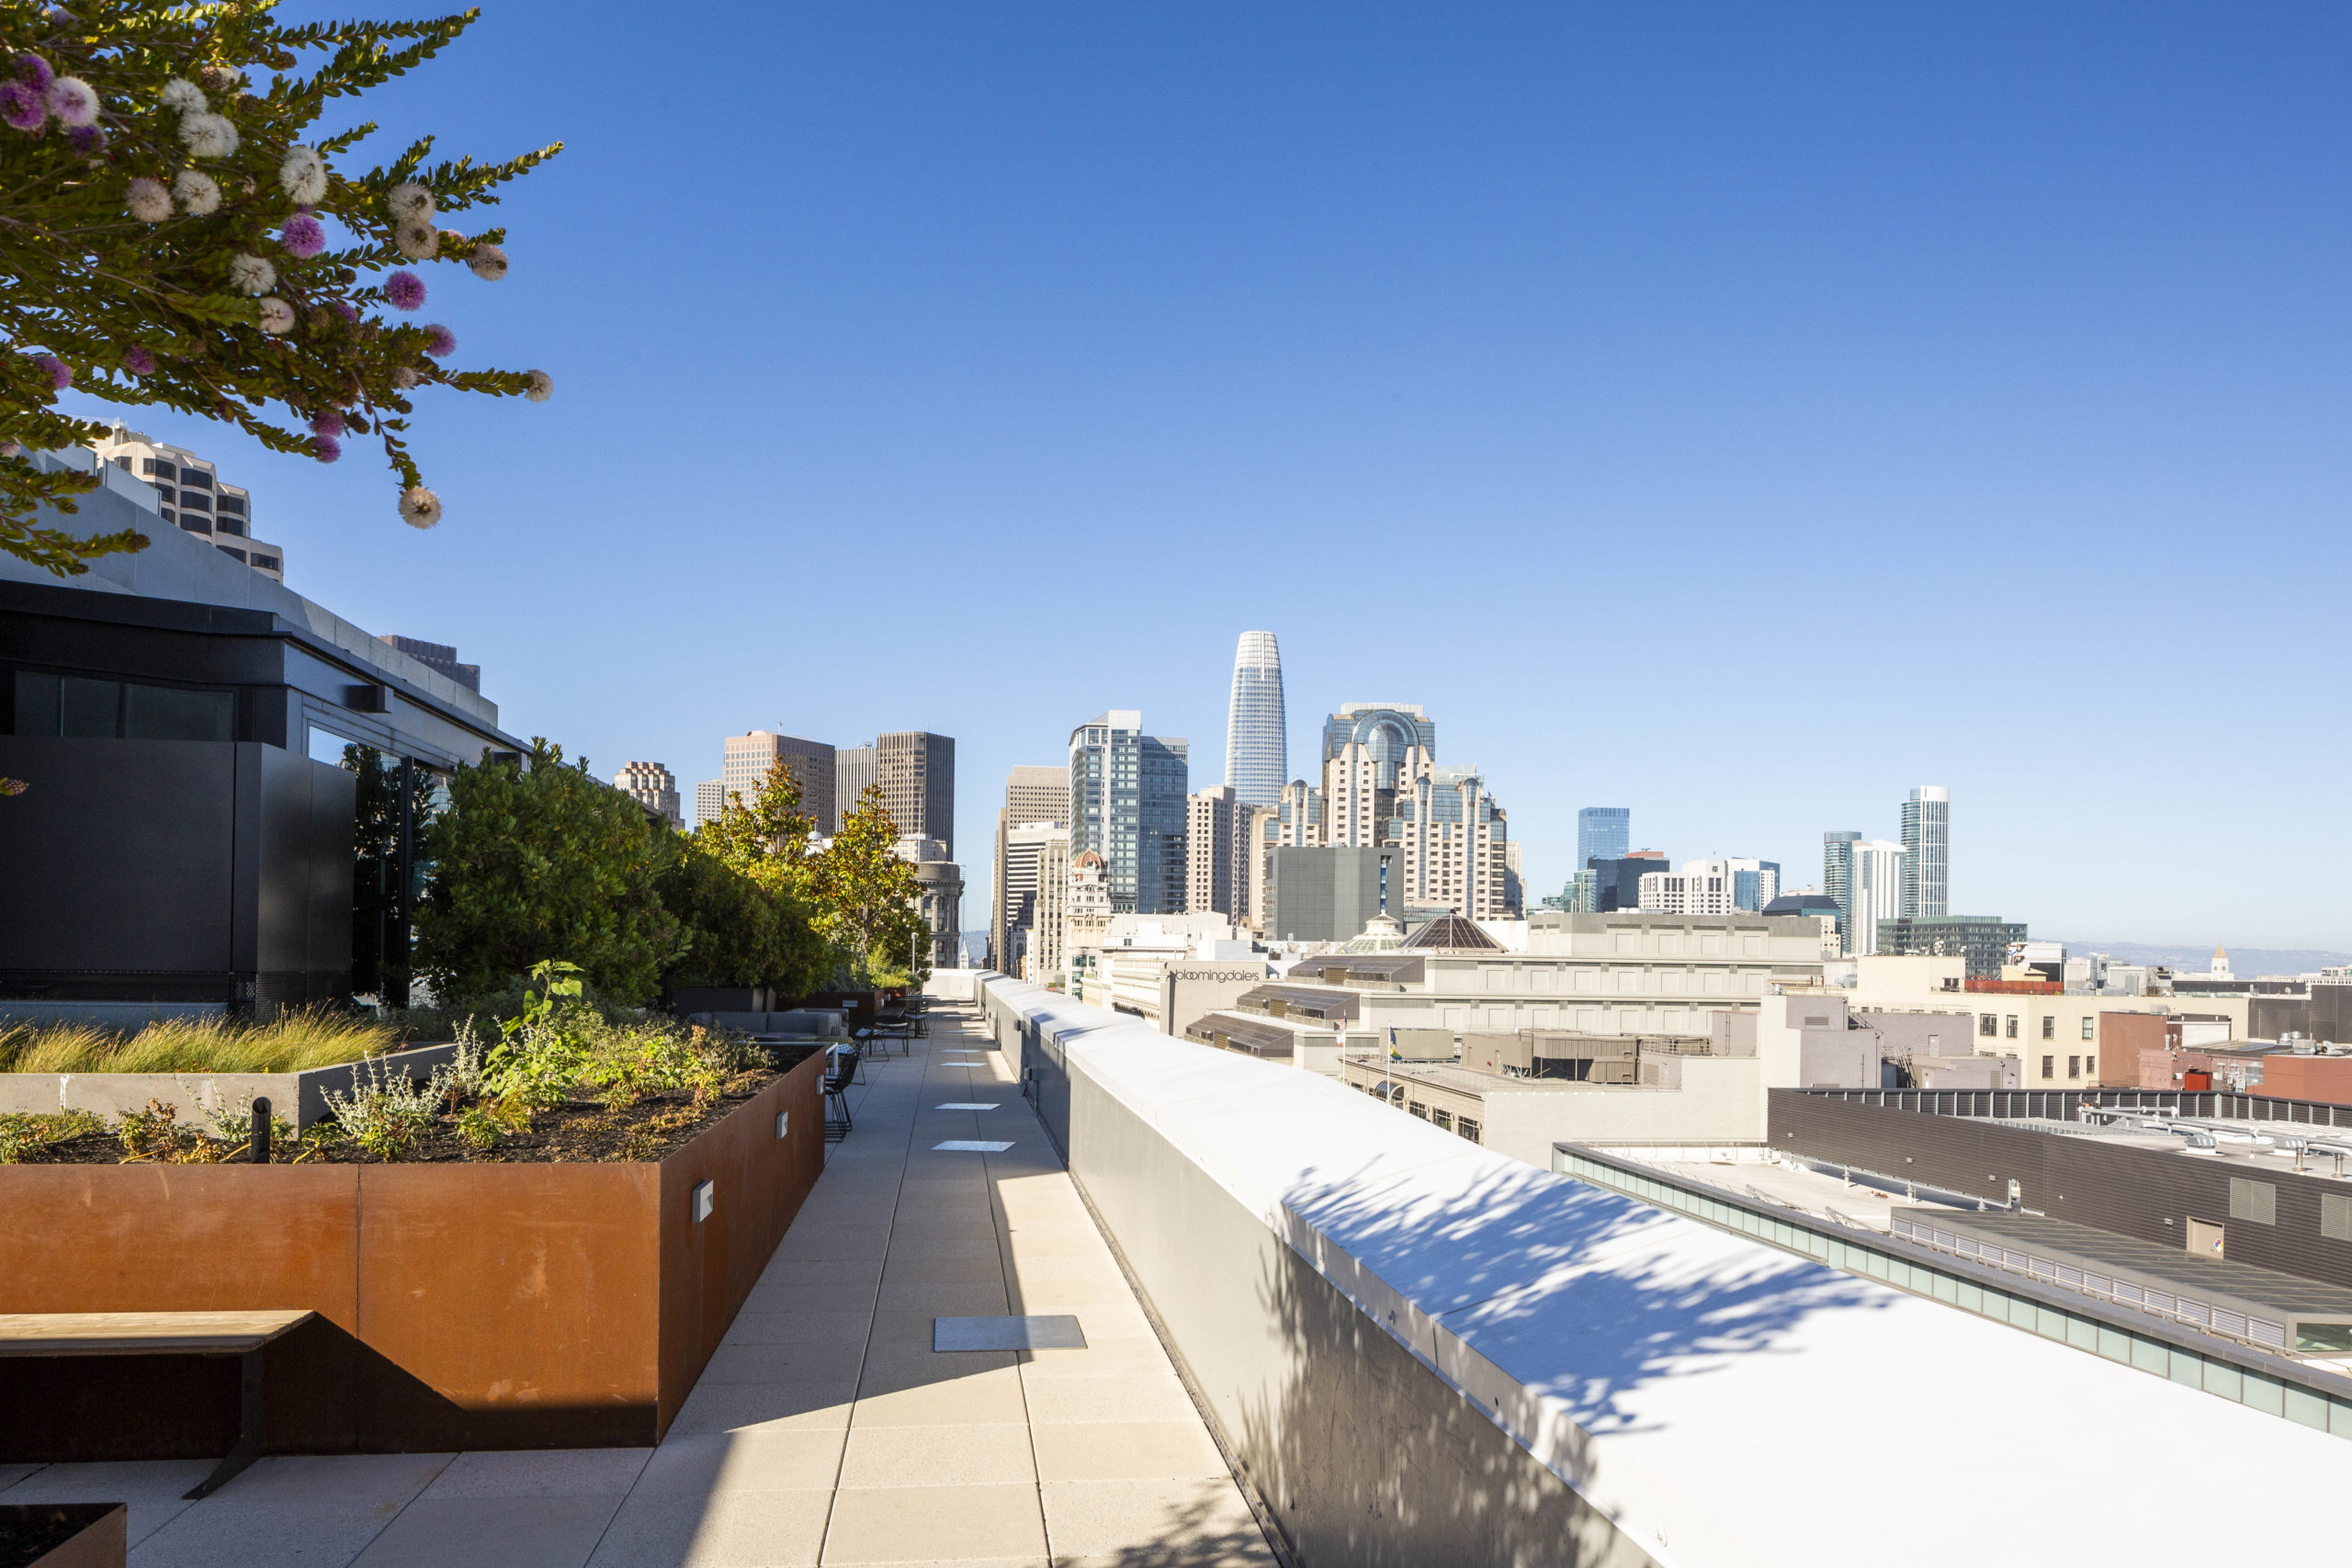 Serif SF rooftop deck view towards the Salesforce Tower, image by Andrew Campbell Nelson